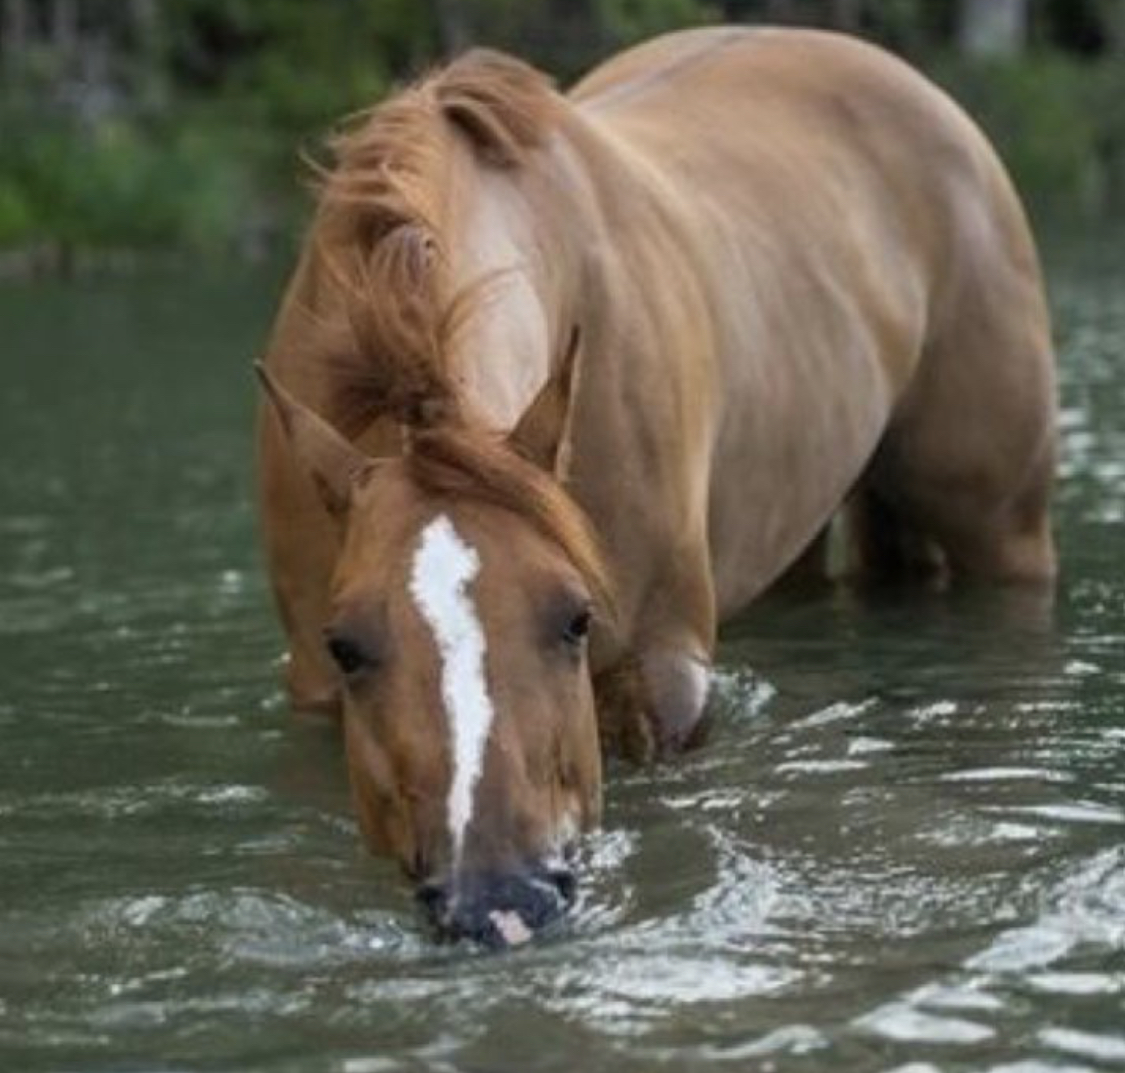 brown Horse with its legs soaked in lake water and drinking from it